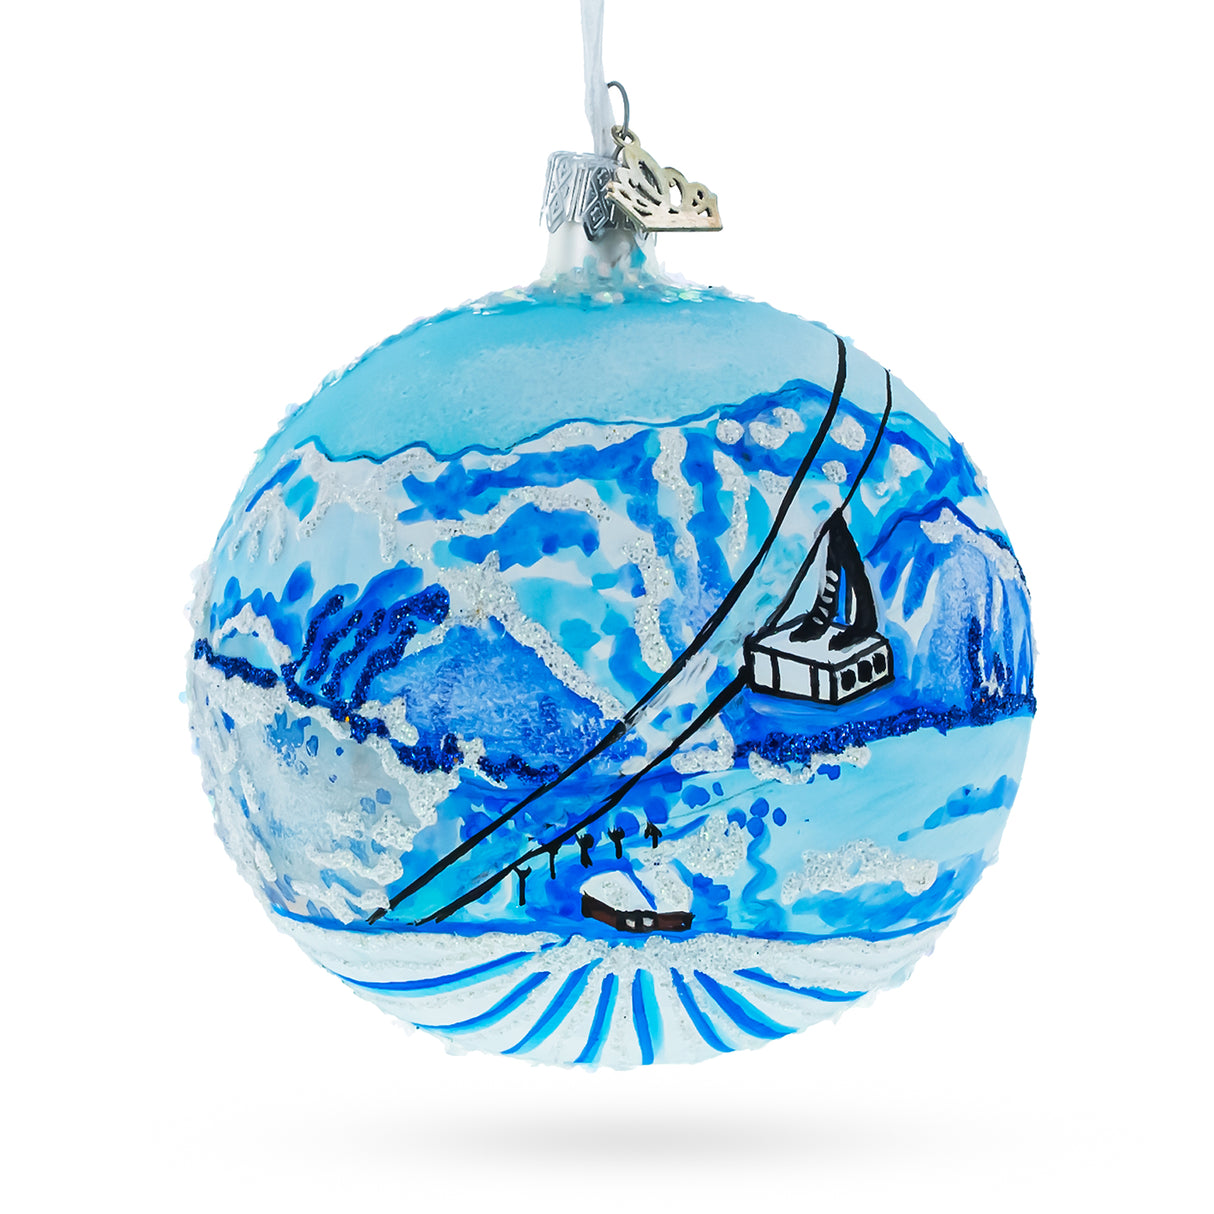 Glass Les Trois Vallees Ski Resorts, France Glass Ball Christmas Ornament 4 Inches in Multi color Round